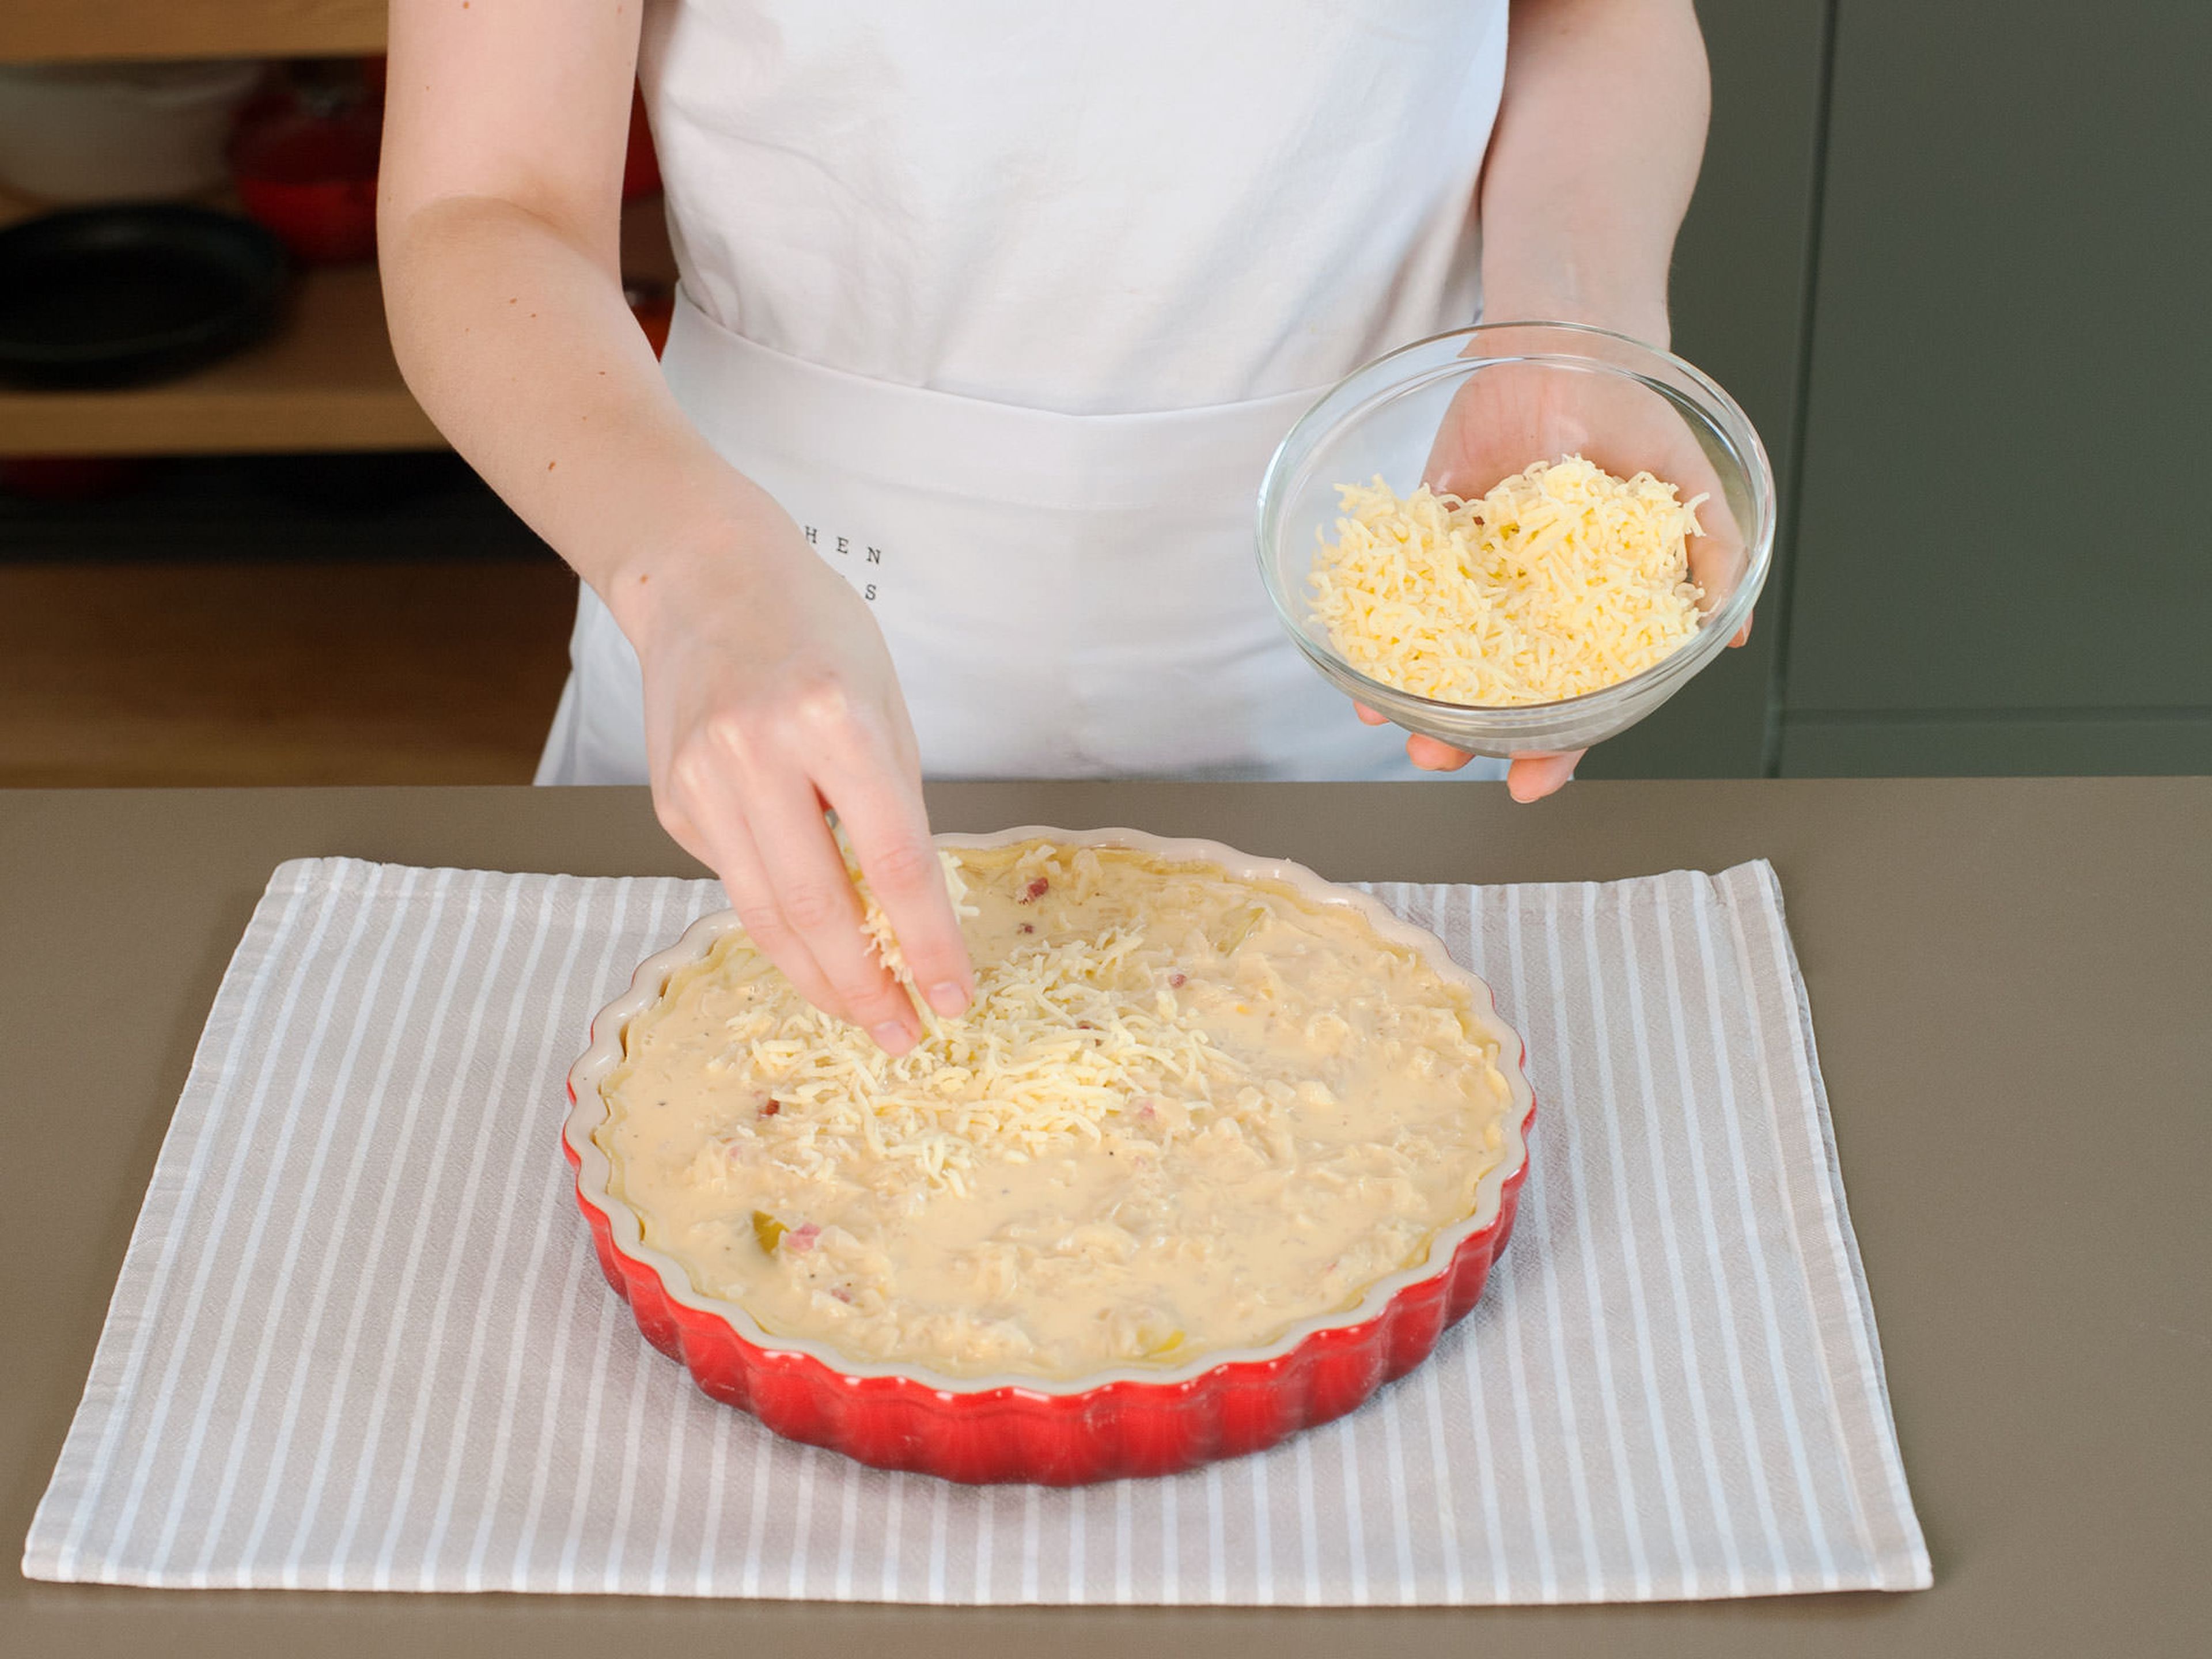 Evenly distribute sauerkraut mixture in pie dish, pour egg and cream mixture on top, and sprinkle with grated cheese. Place in preheated oven and bake at 180°C/350°F for approx. 25 – 30 min. until golden brown. Serve warm immediately. Enjoy with a dollop of crème fraiche on top, if desired!